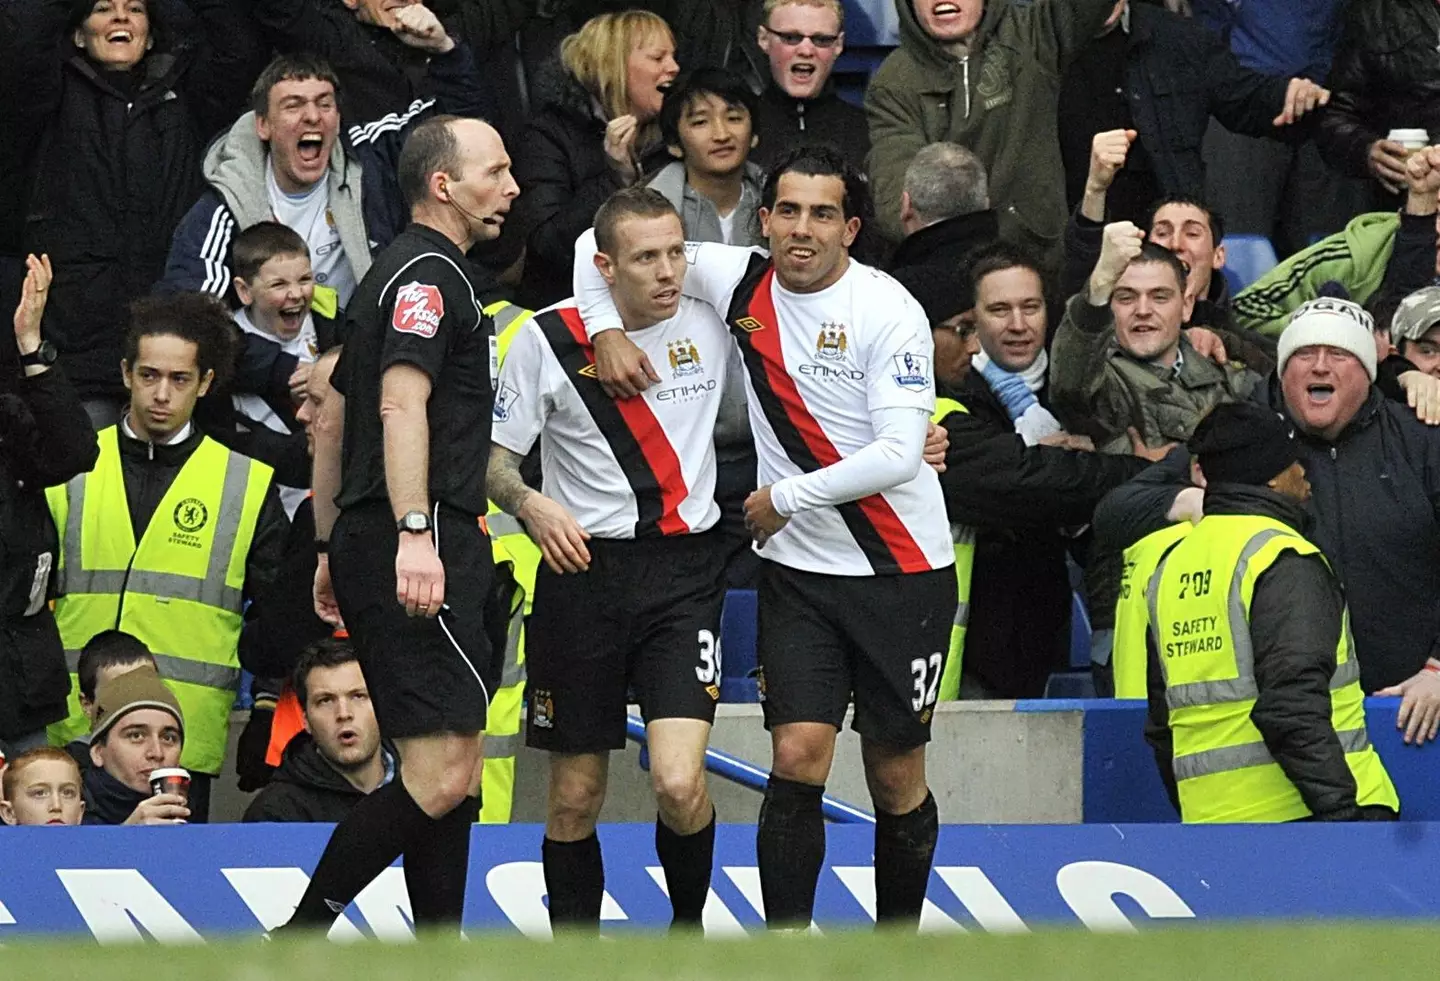 Bellamy and Tevez in action for Manchester City. Image